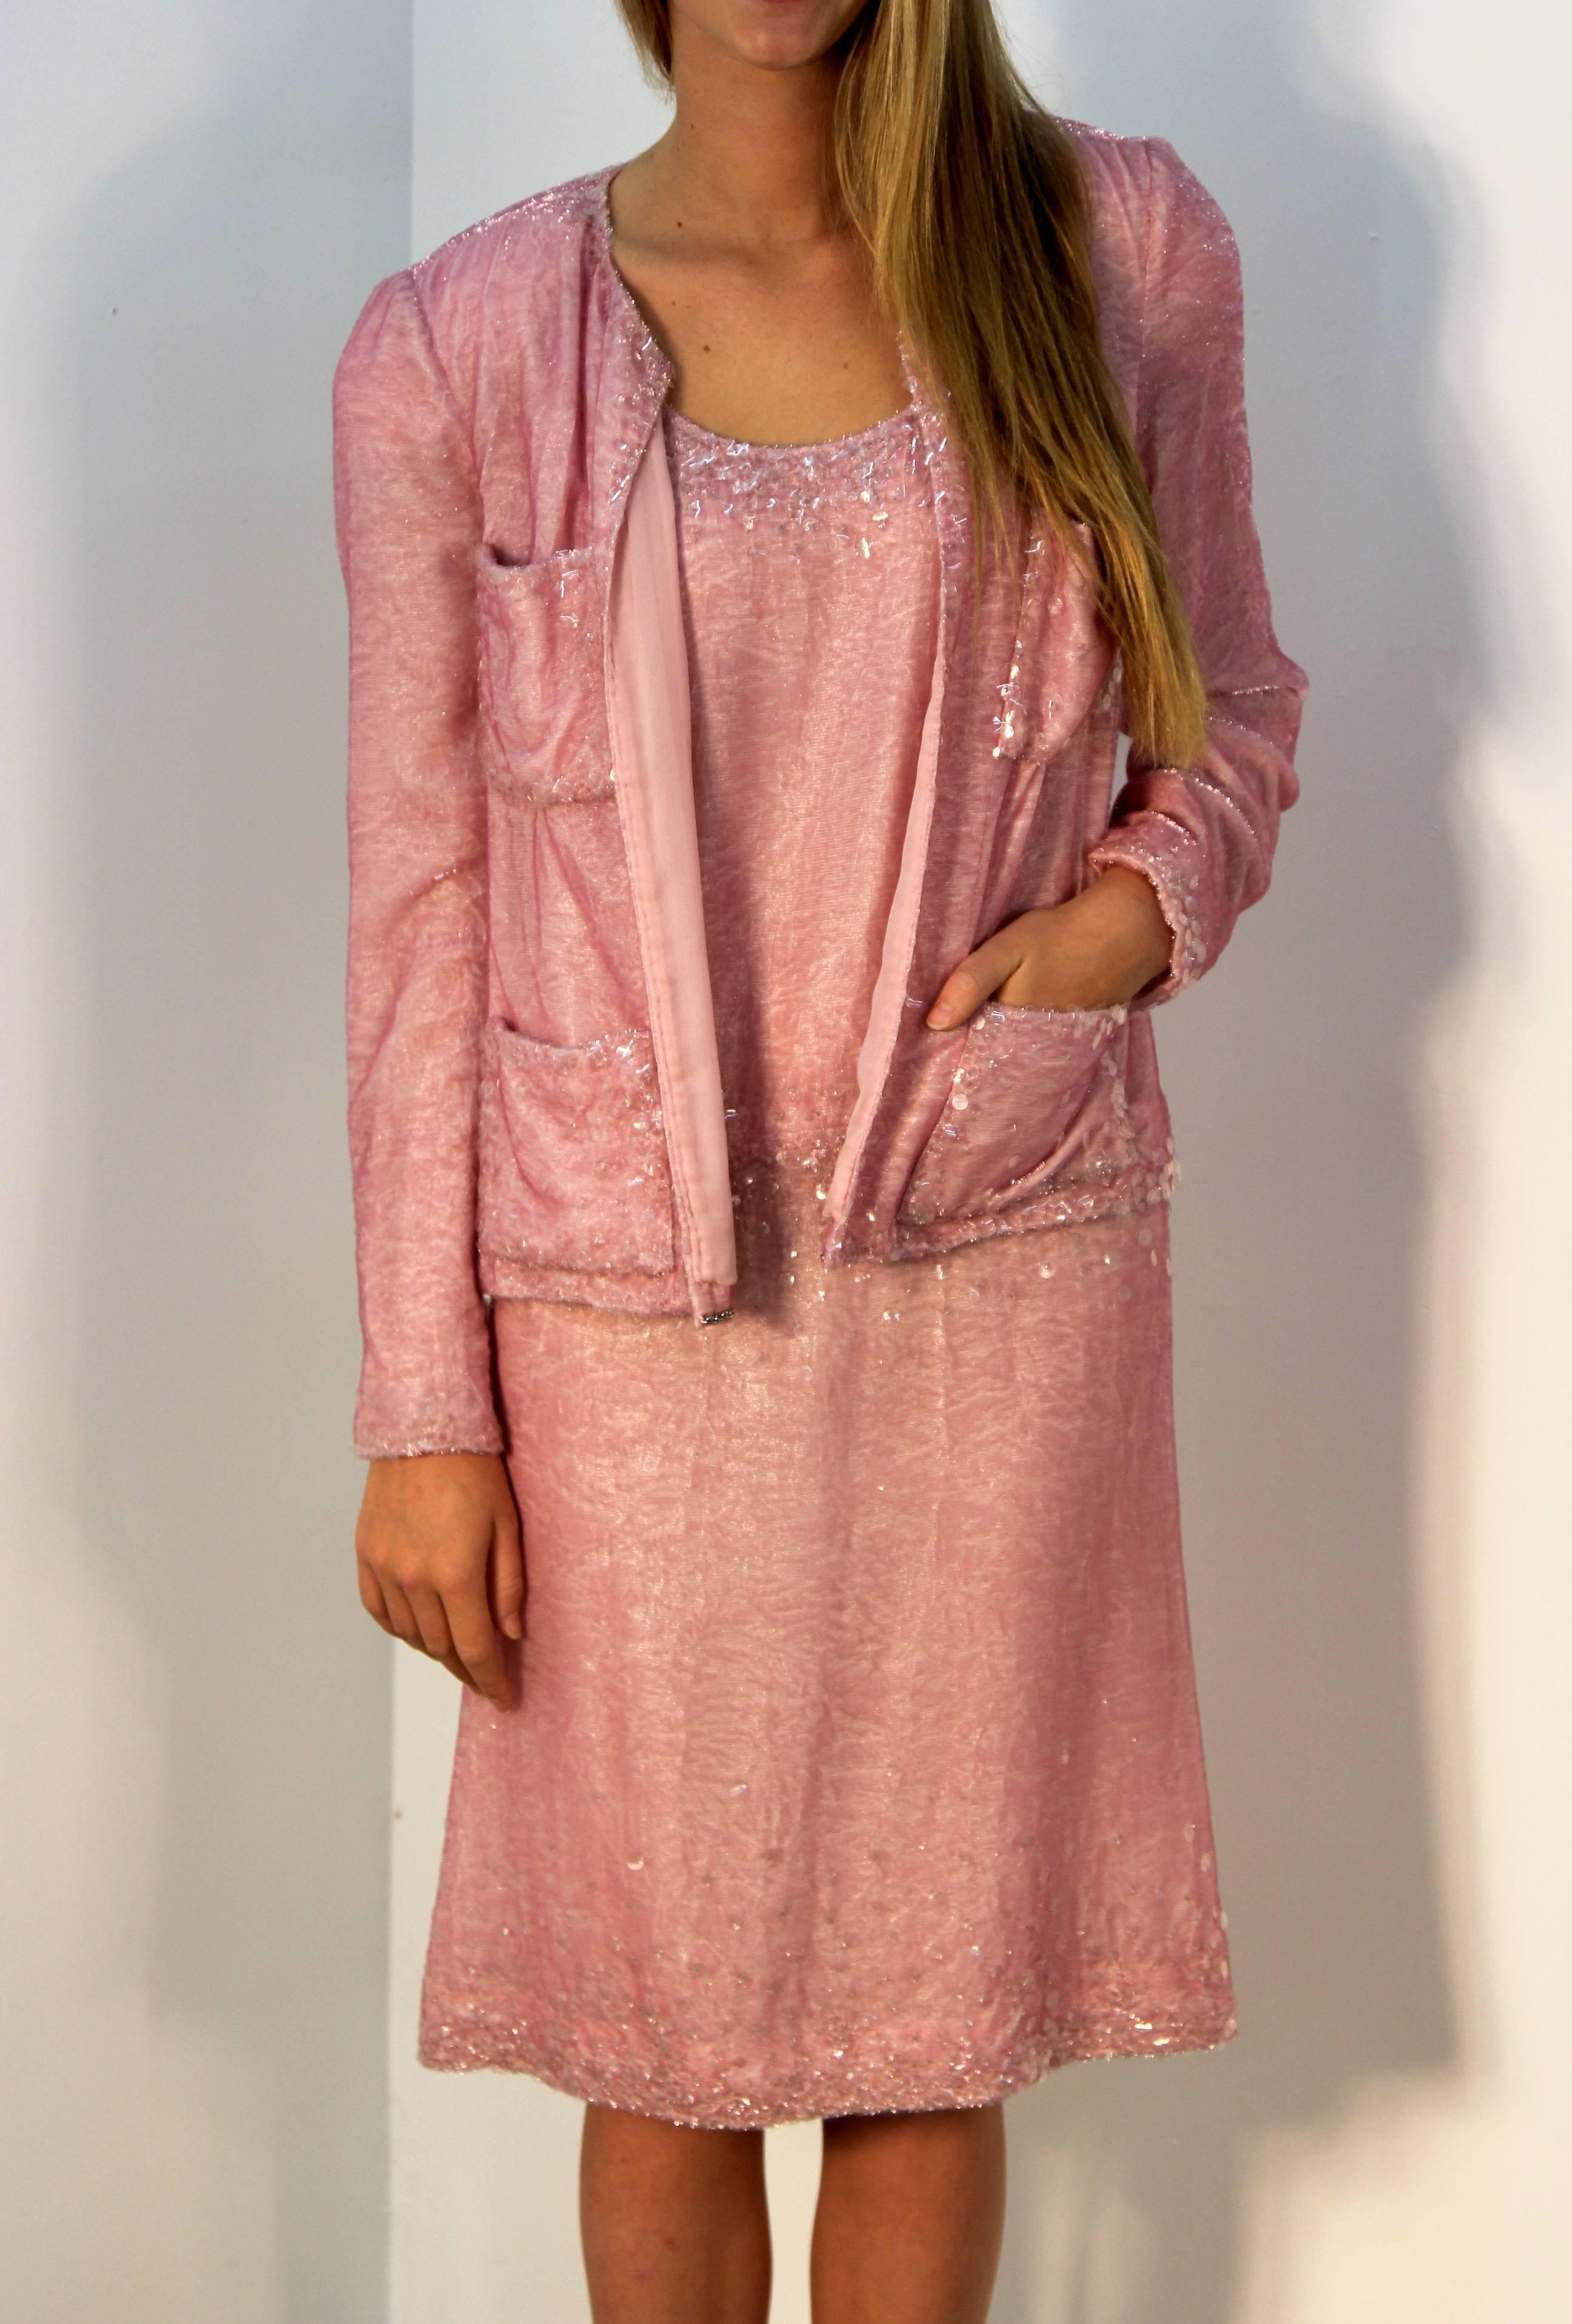 Chanel Pretty in Pink Dress and Jacket 1